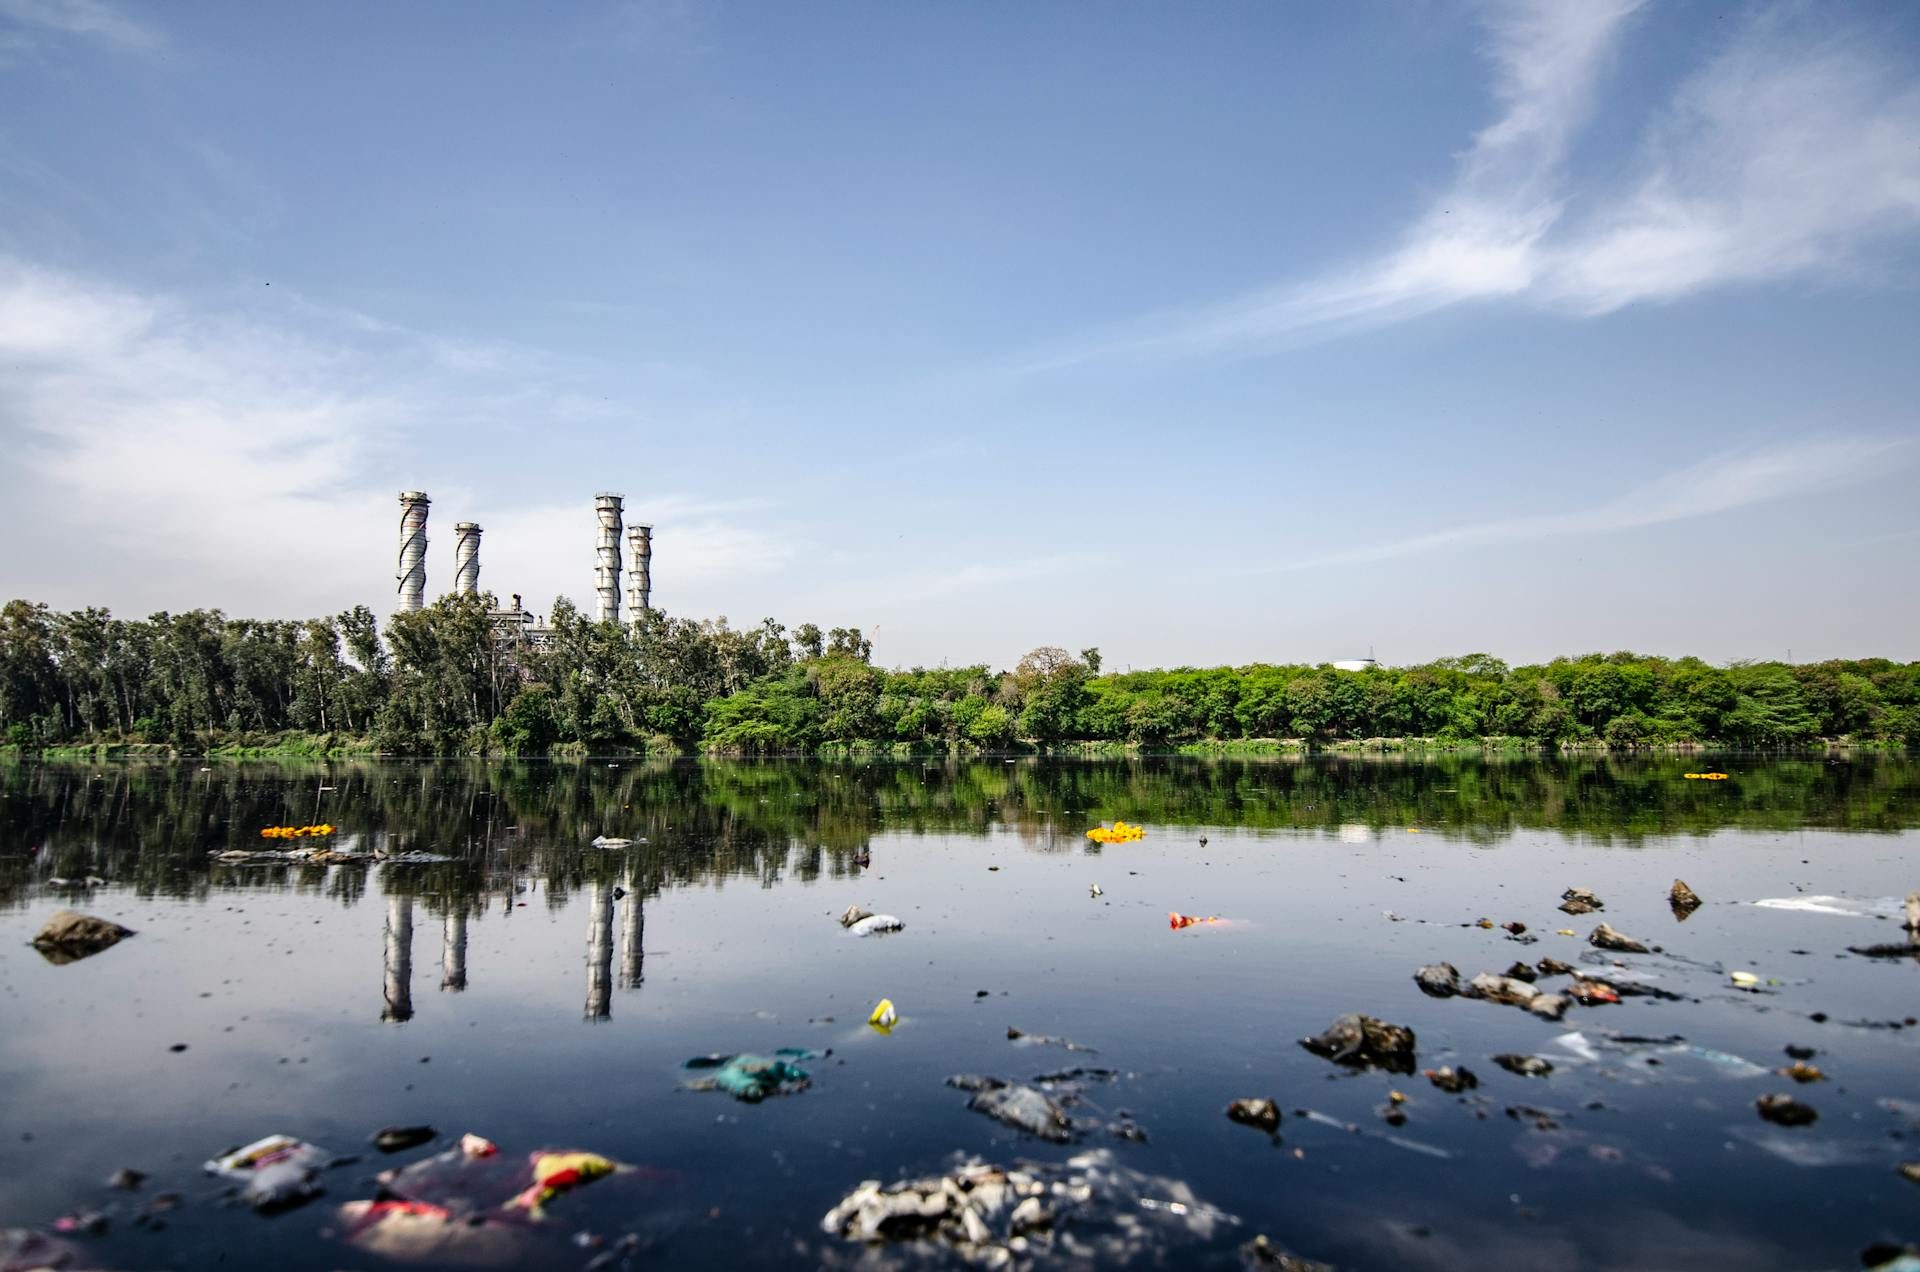 Waste and pollution in water